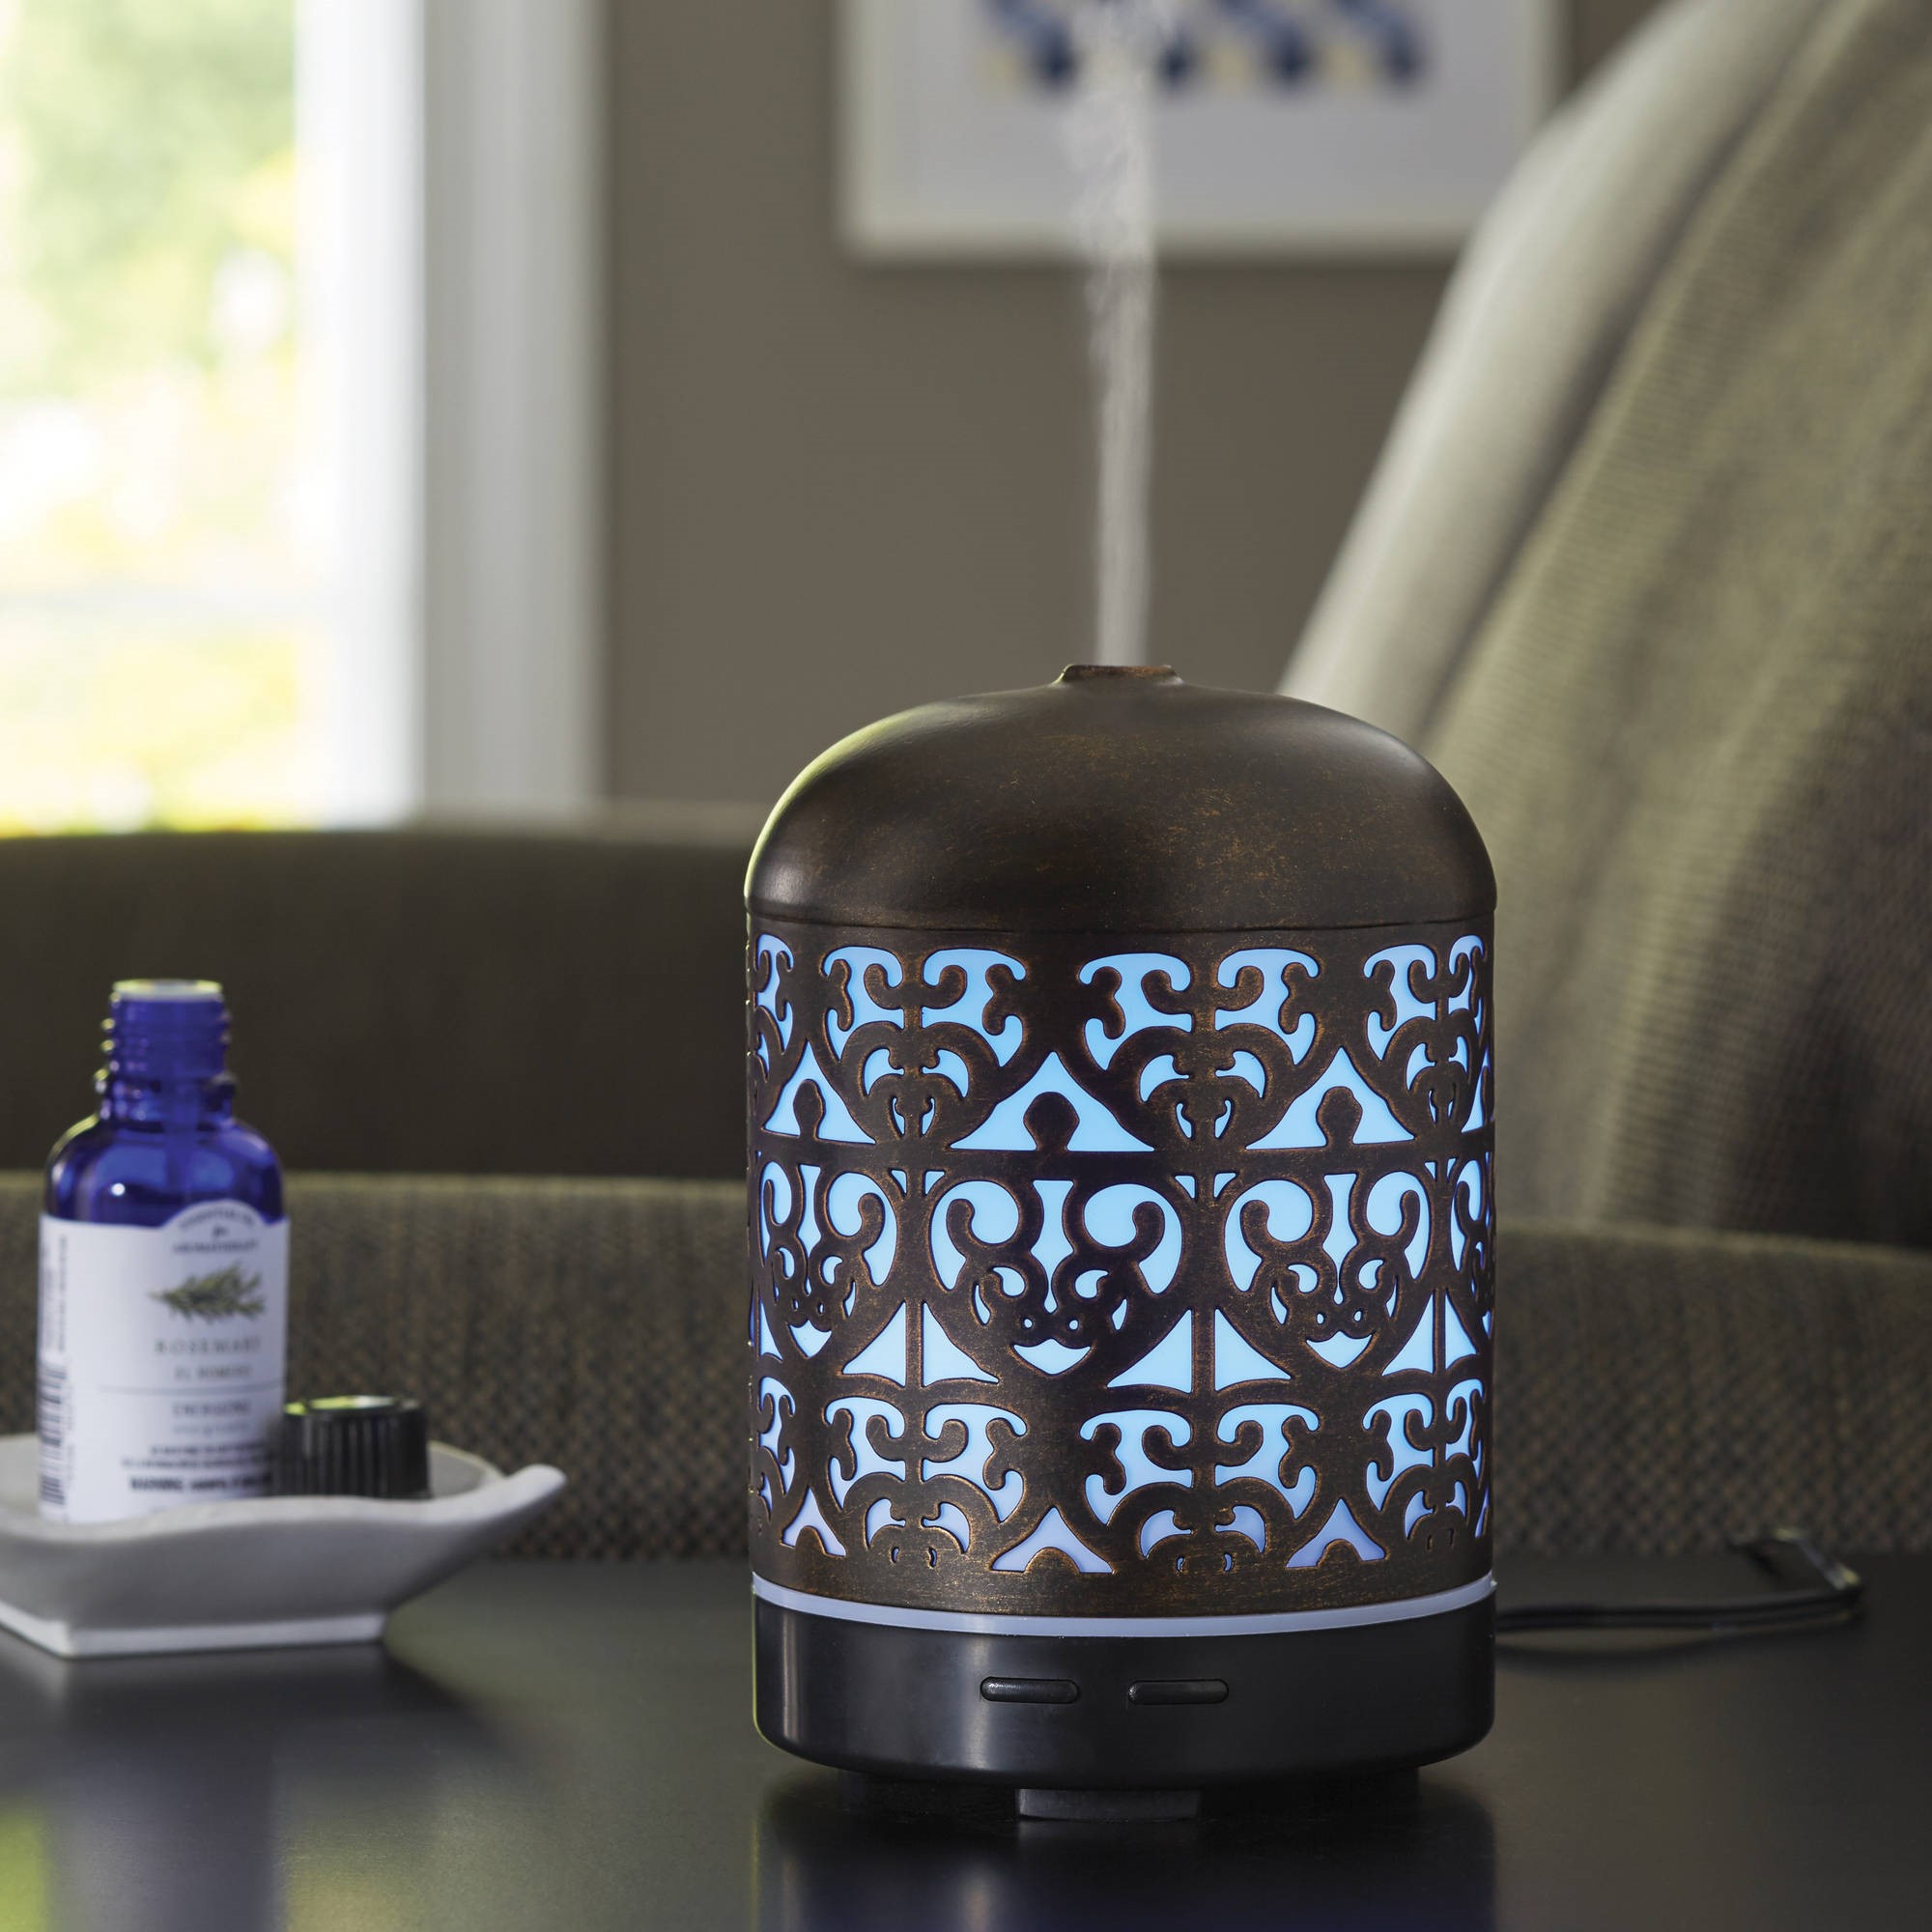 Better Homes & Gardens Cool Mist Ultrasonic Aroma Diffuser, Moroccan Scroll, 100 mL - image 1 of 3